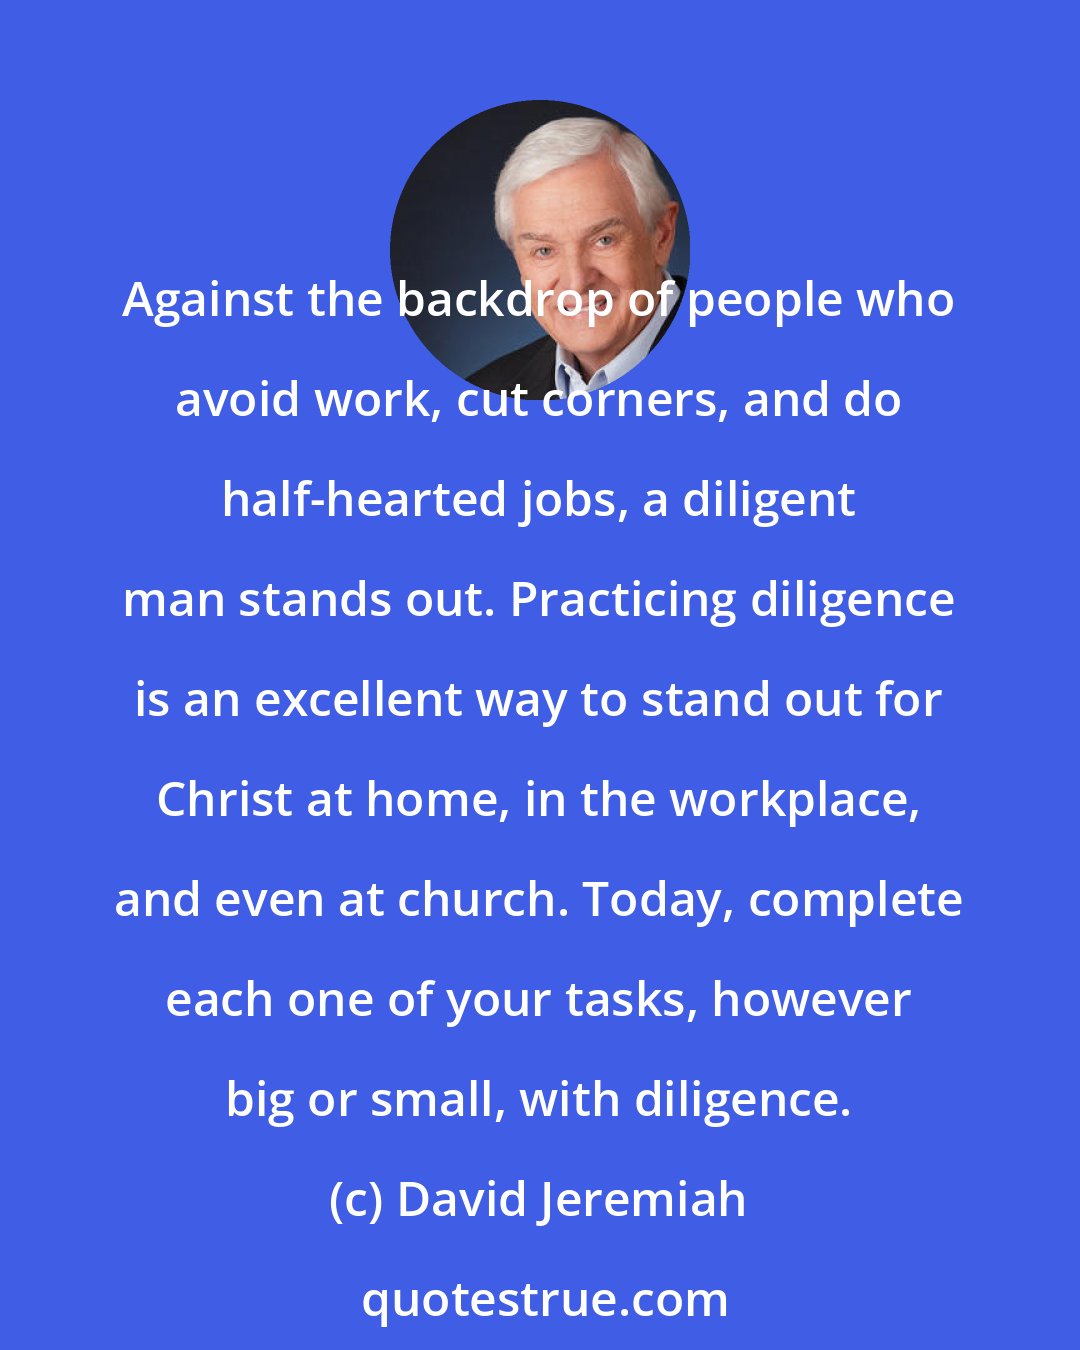 David Jeremiah: Against the backdrop of people who avoid work, cut corners, and do half-hearted jobs, a diligent man stands out. Practicing diligence is an excellent way to stand out for Christ at home, in the workplace, and even at church. Today, complete each one of your tasks, however big or small, with diligence.